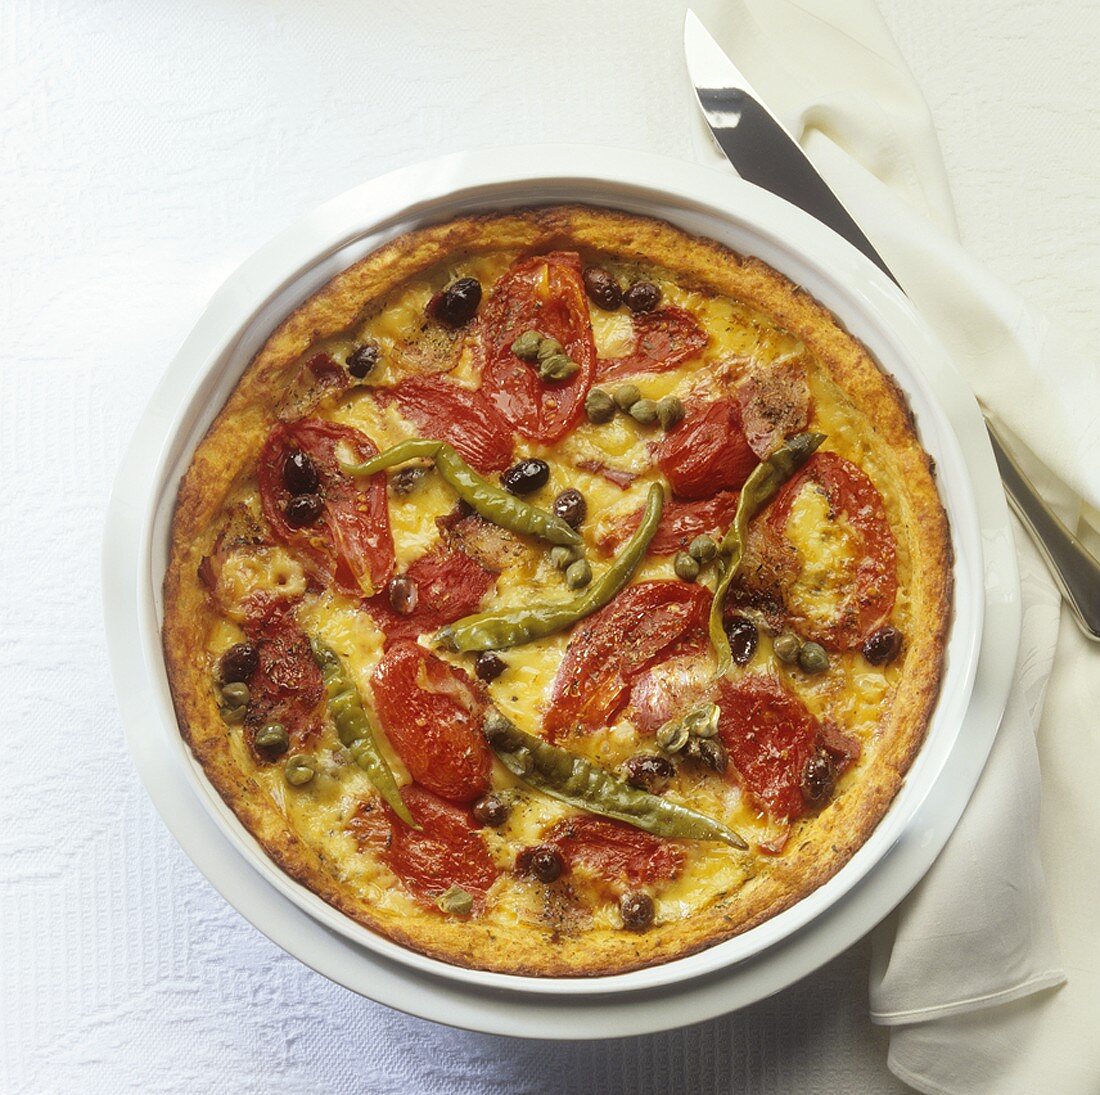 Potato pizza topped with tomatoes, capers and chillies